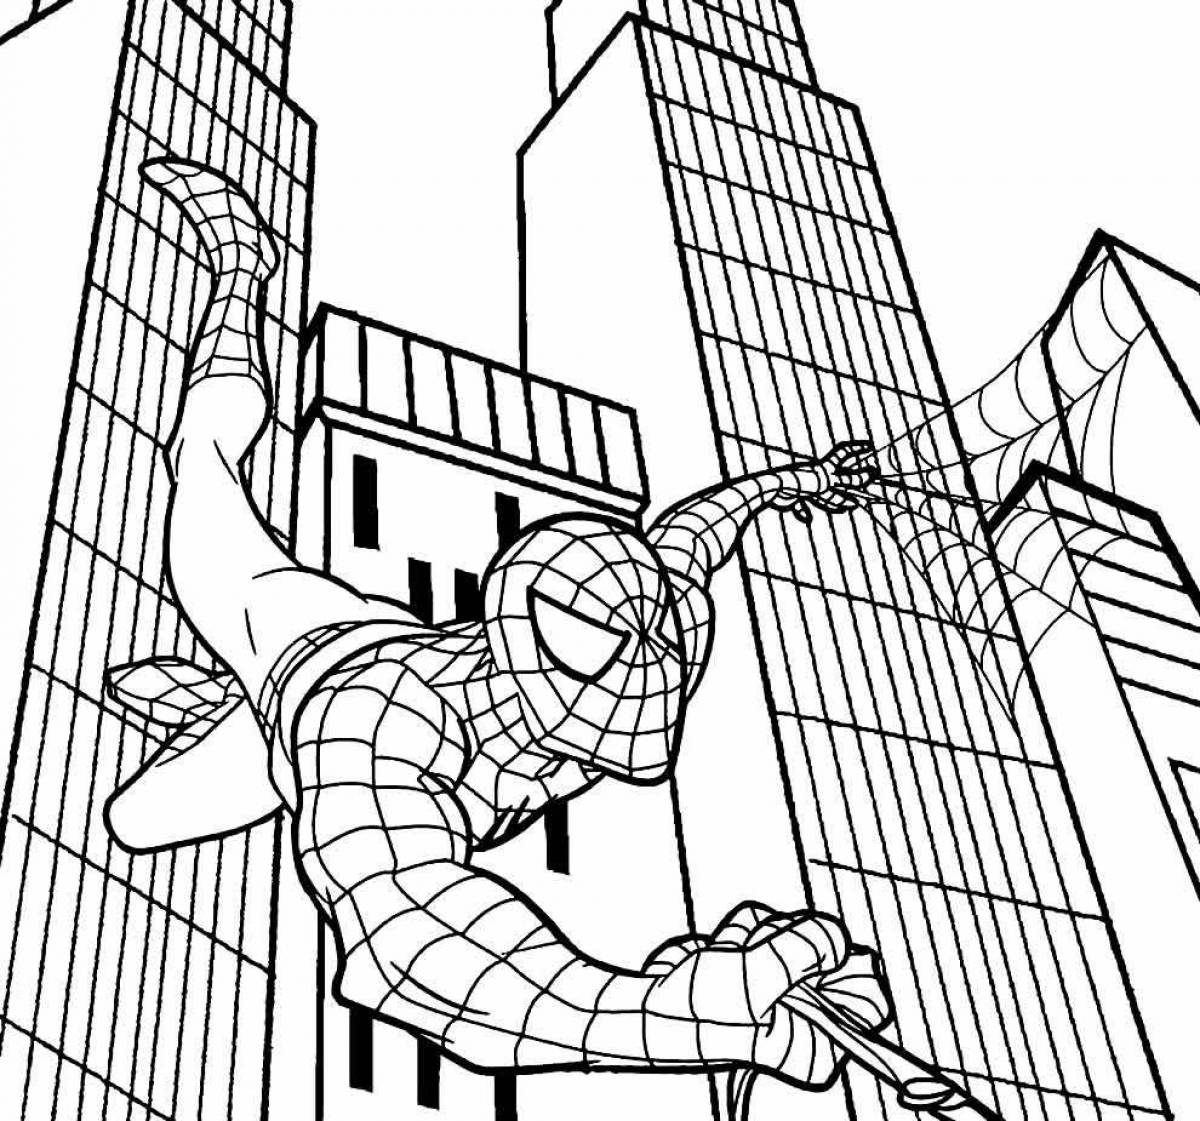 Amazing spiderman coloring page for kids